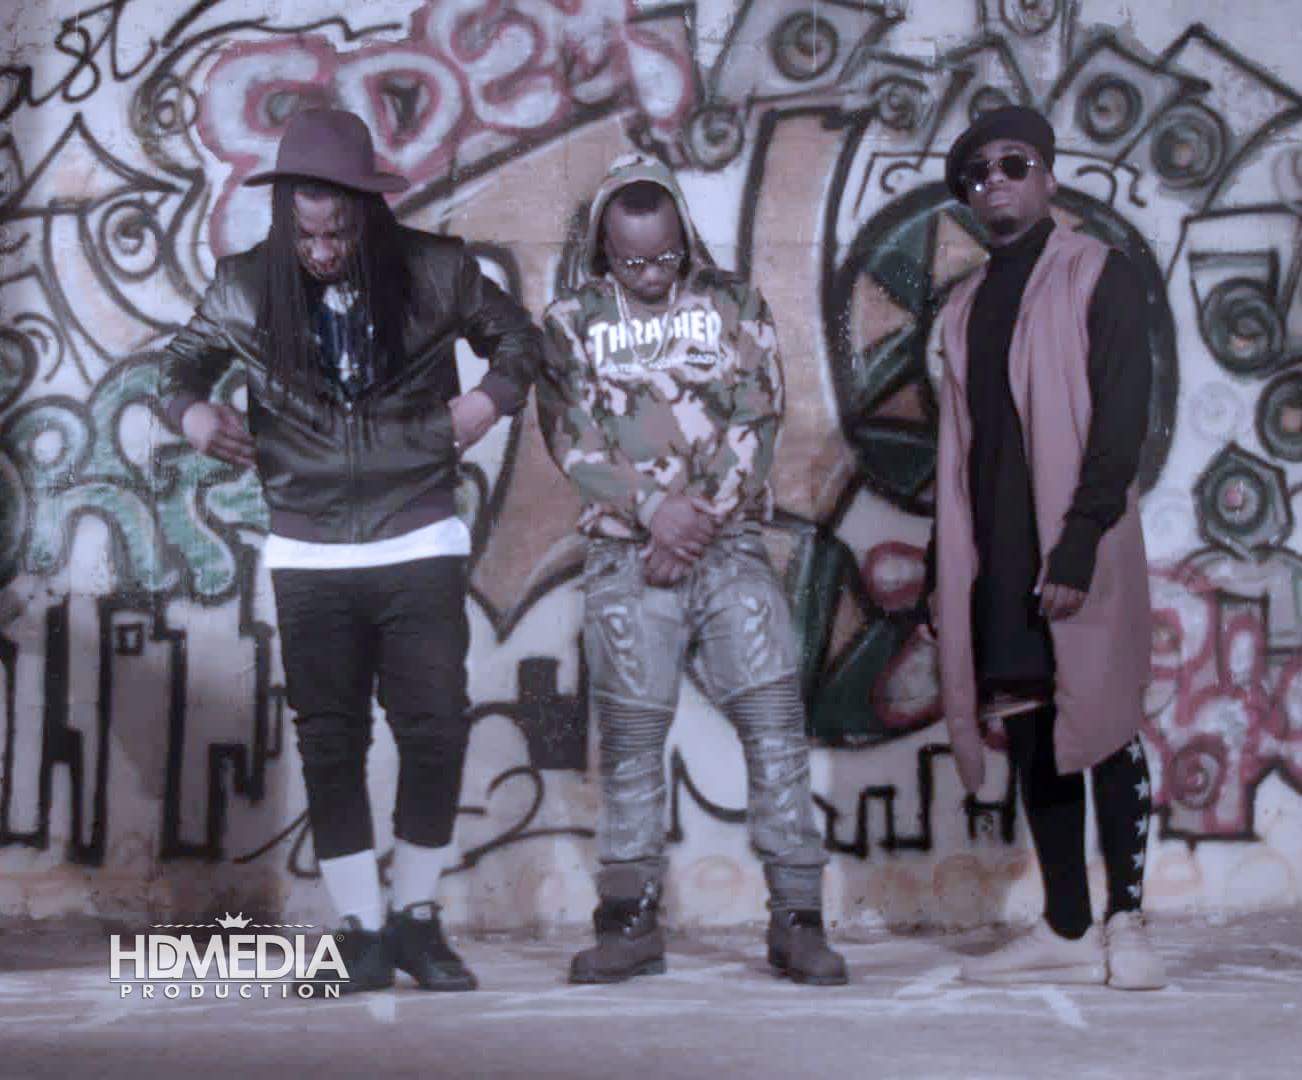 Check out Torgbe’s new music video ‘Tasi’ featuring Edem and Teephlow.